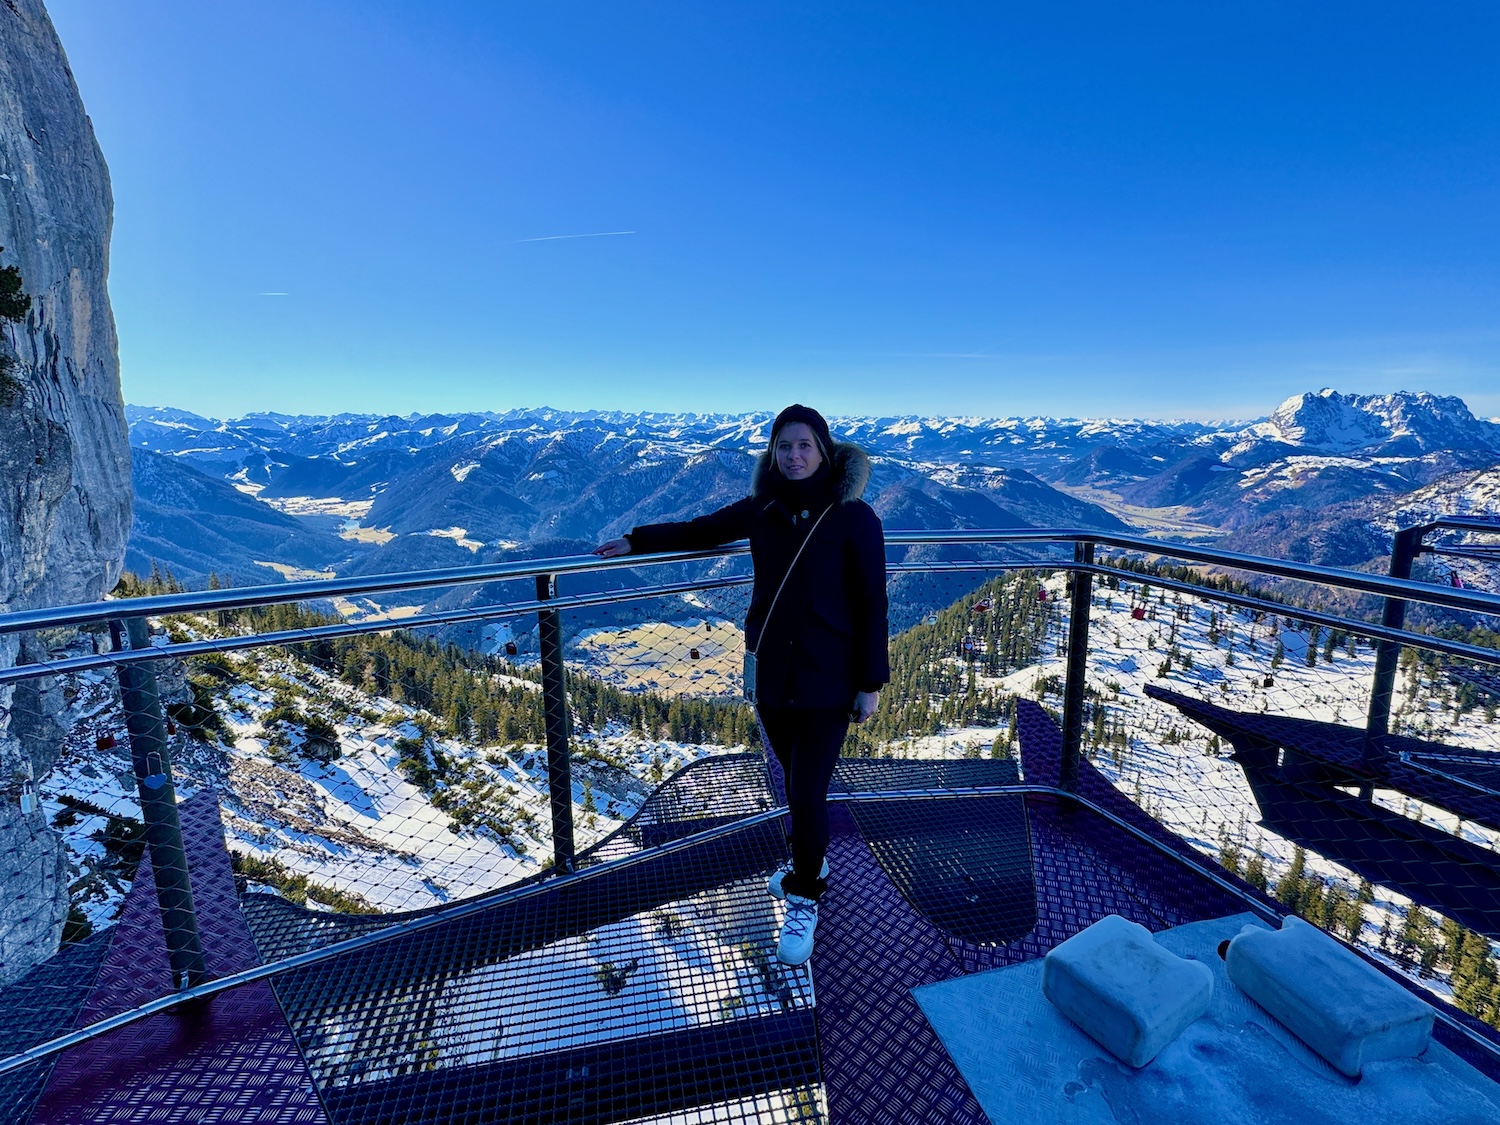 In Waidring you can hike to the spectacular viewing platform, from which you have a breathtaking panoramic view. Photo: Sascha Tegtmeyer ski vacation in Fieberbrunn winter vacation travel report experience report experiences